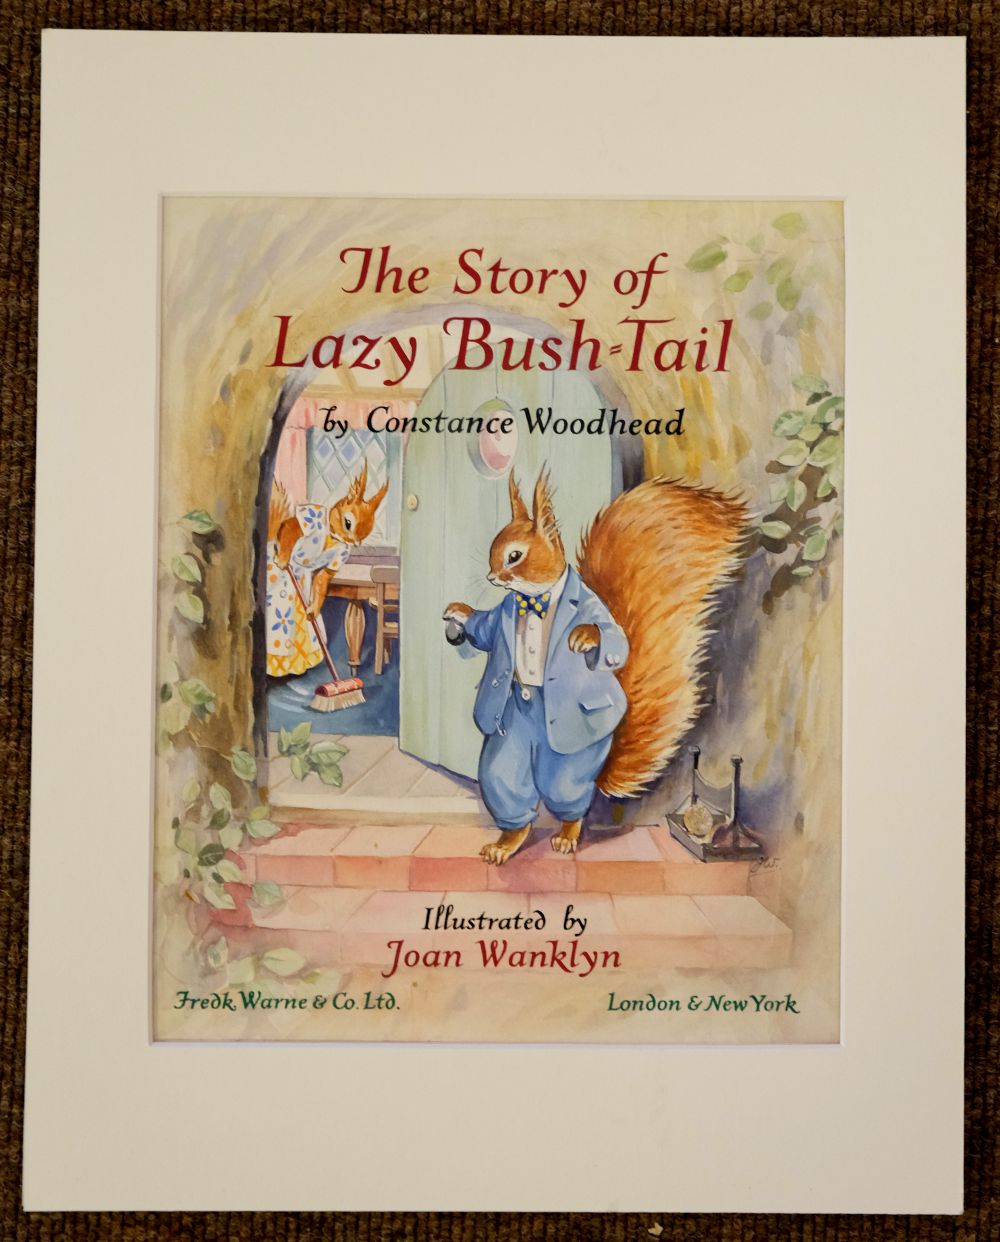 Wanklyn (Joan, 1924-1999). Original illustrations for The Story of Lazy Bush-Tail, [1953] - Image 6 of 6